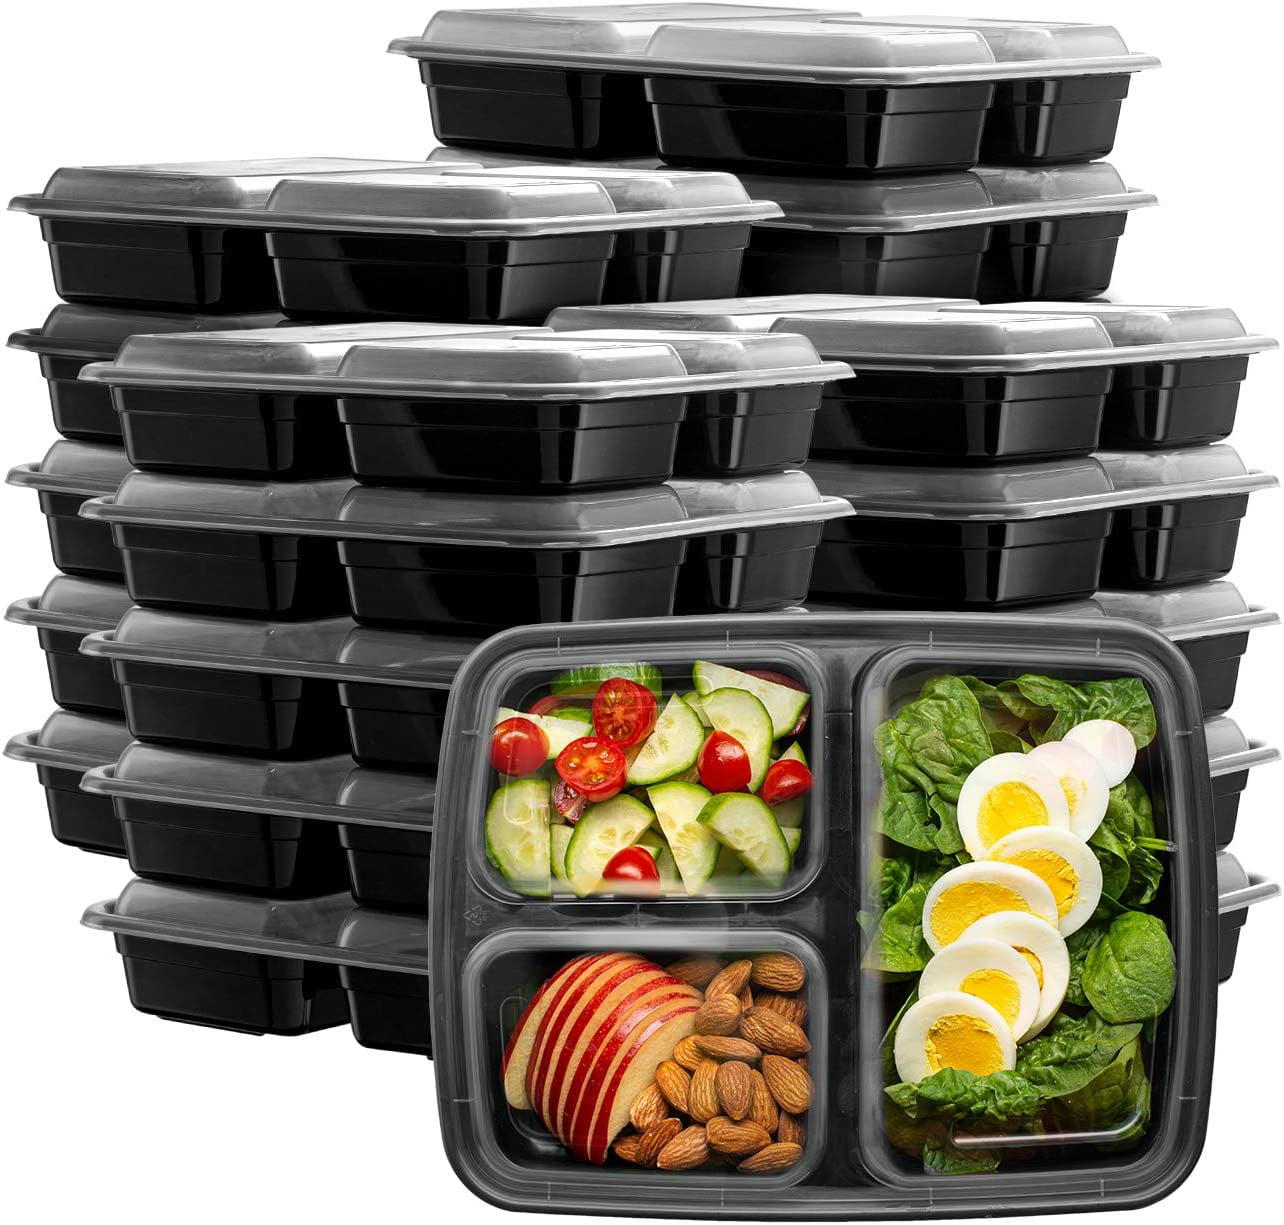 KEMETHY 40 Pcs Food Storage Containers with Lids Airtight (20 Containers & 20 Lids) Plastic Meal Prep Container for Pantry & Kitchen Organizat